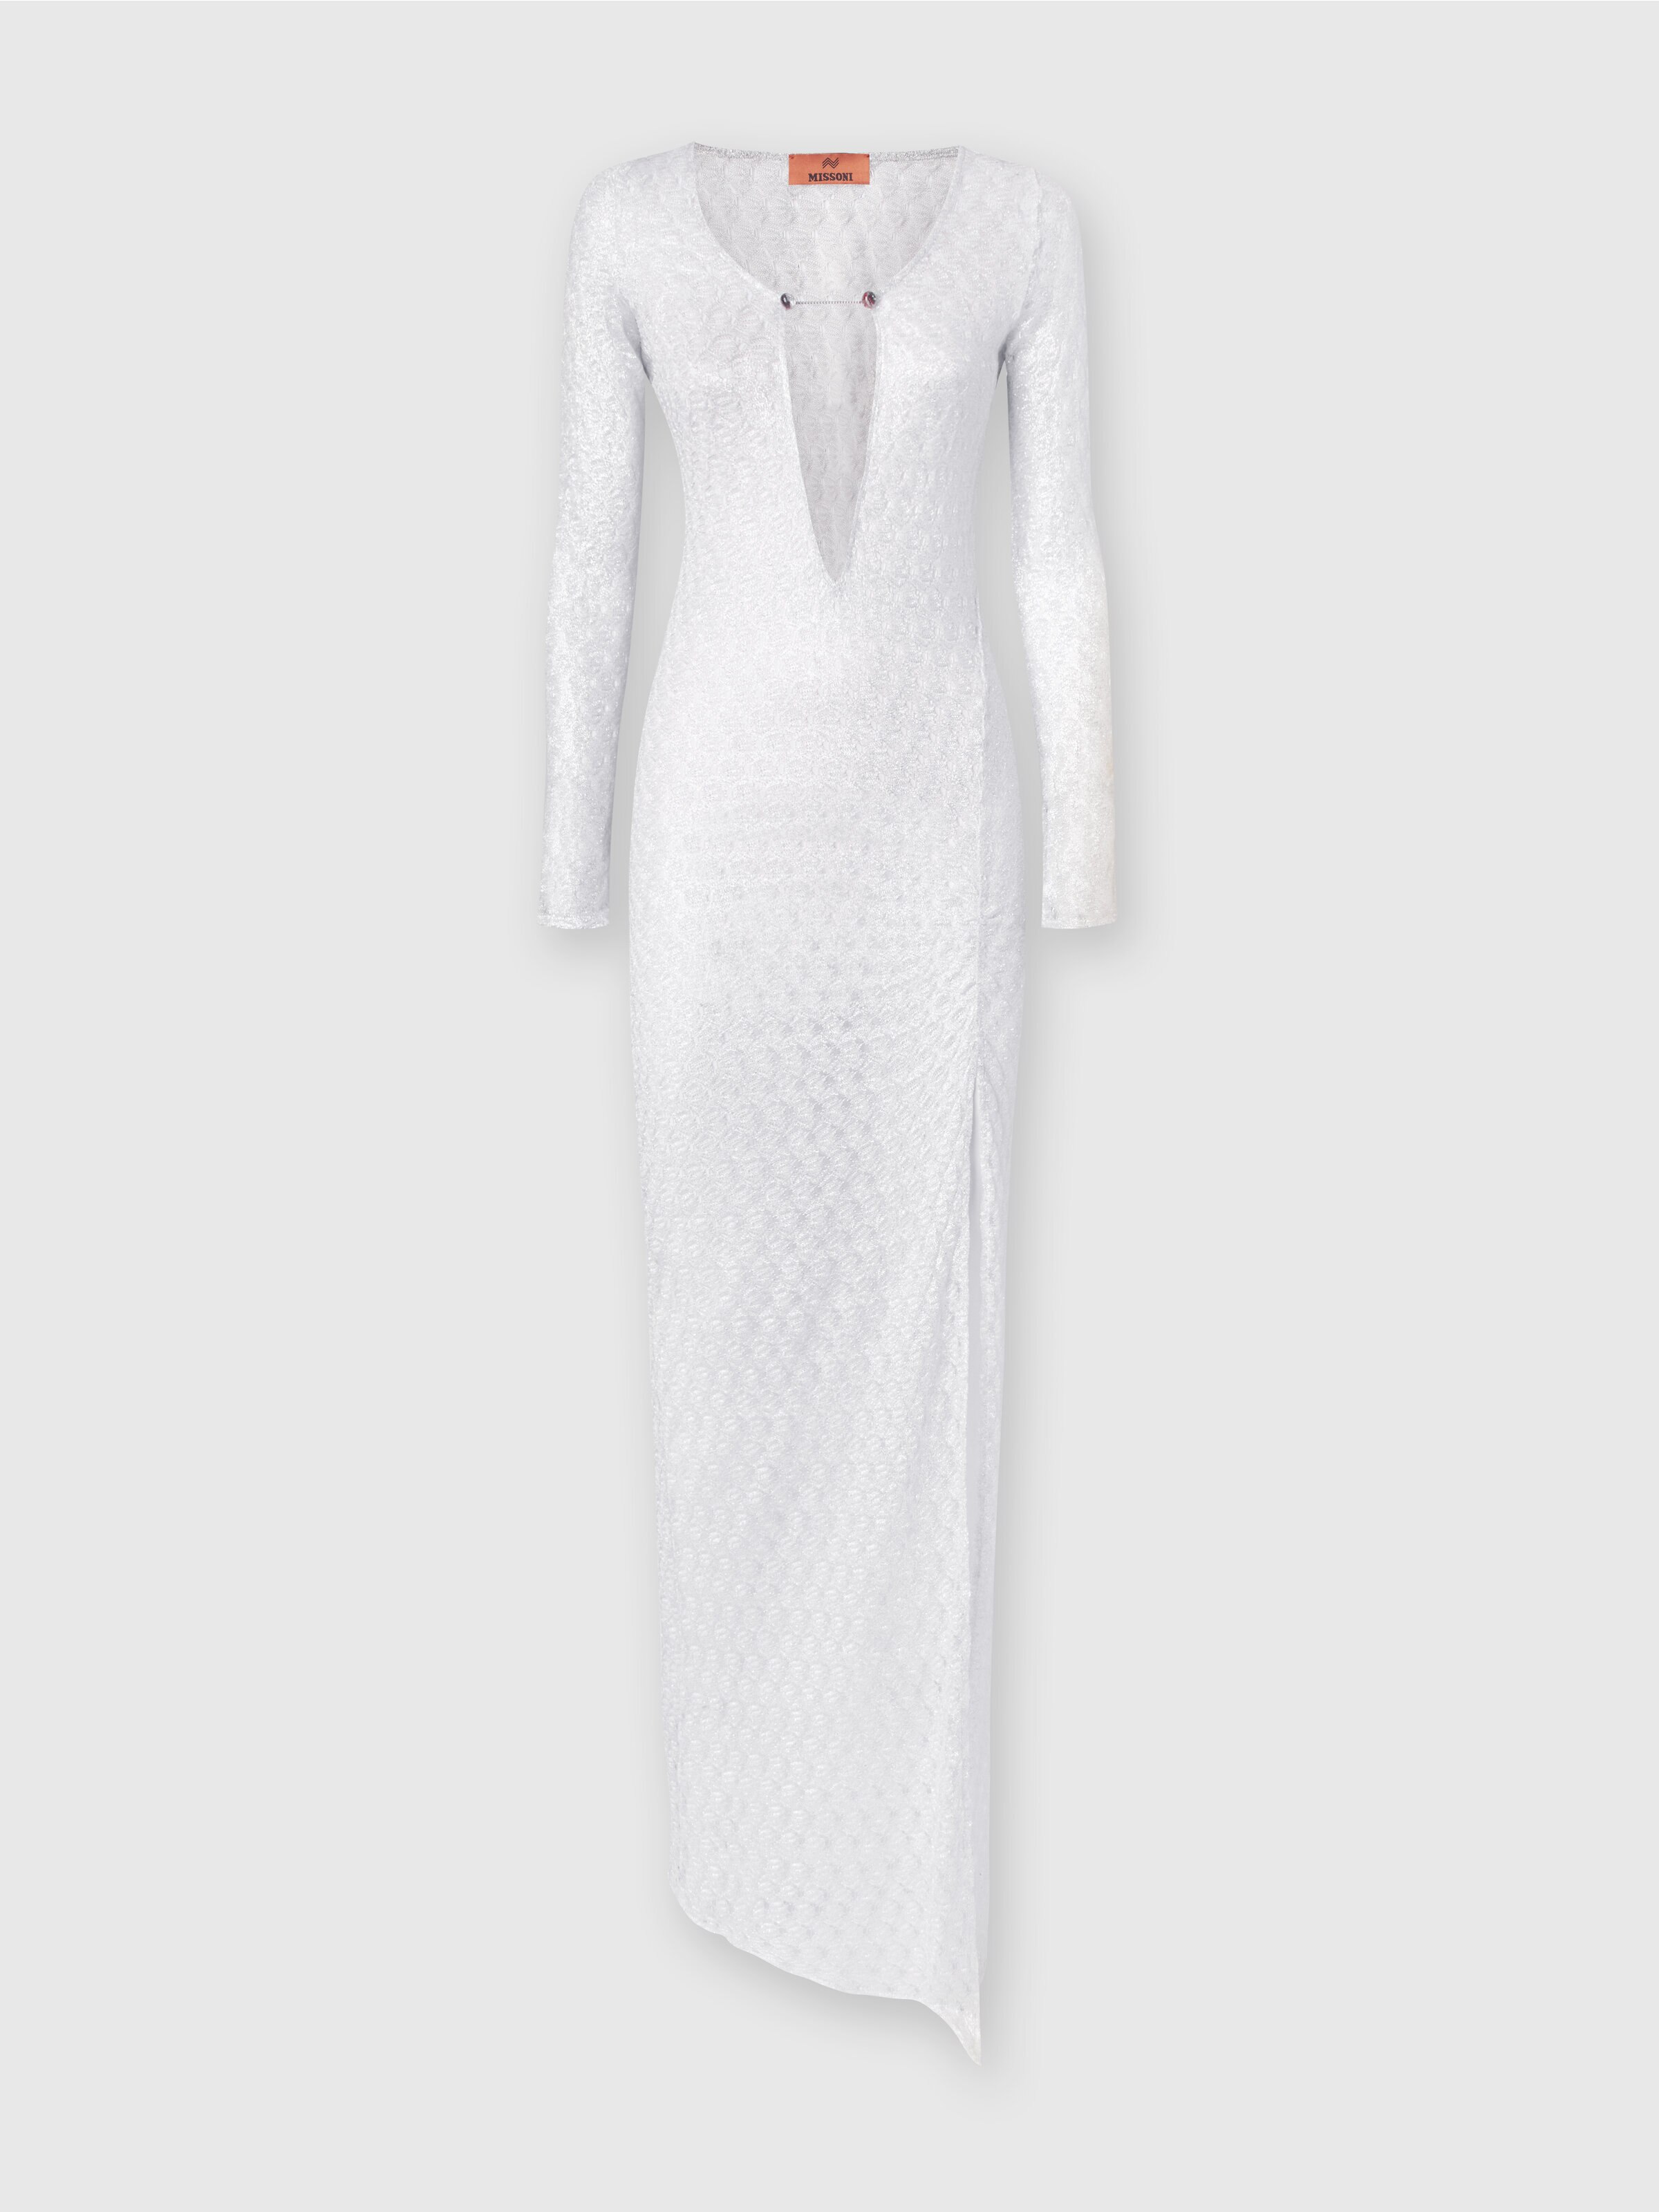 Long lace-effect dress with V neckline and appliqués, White  - 0